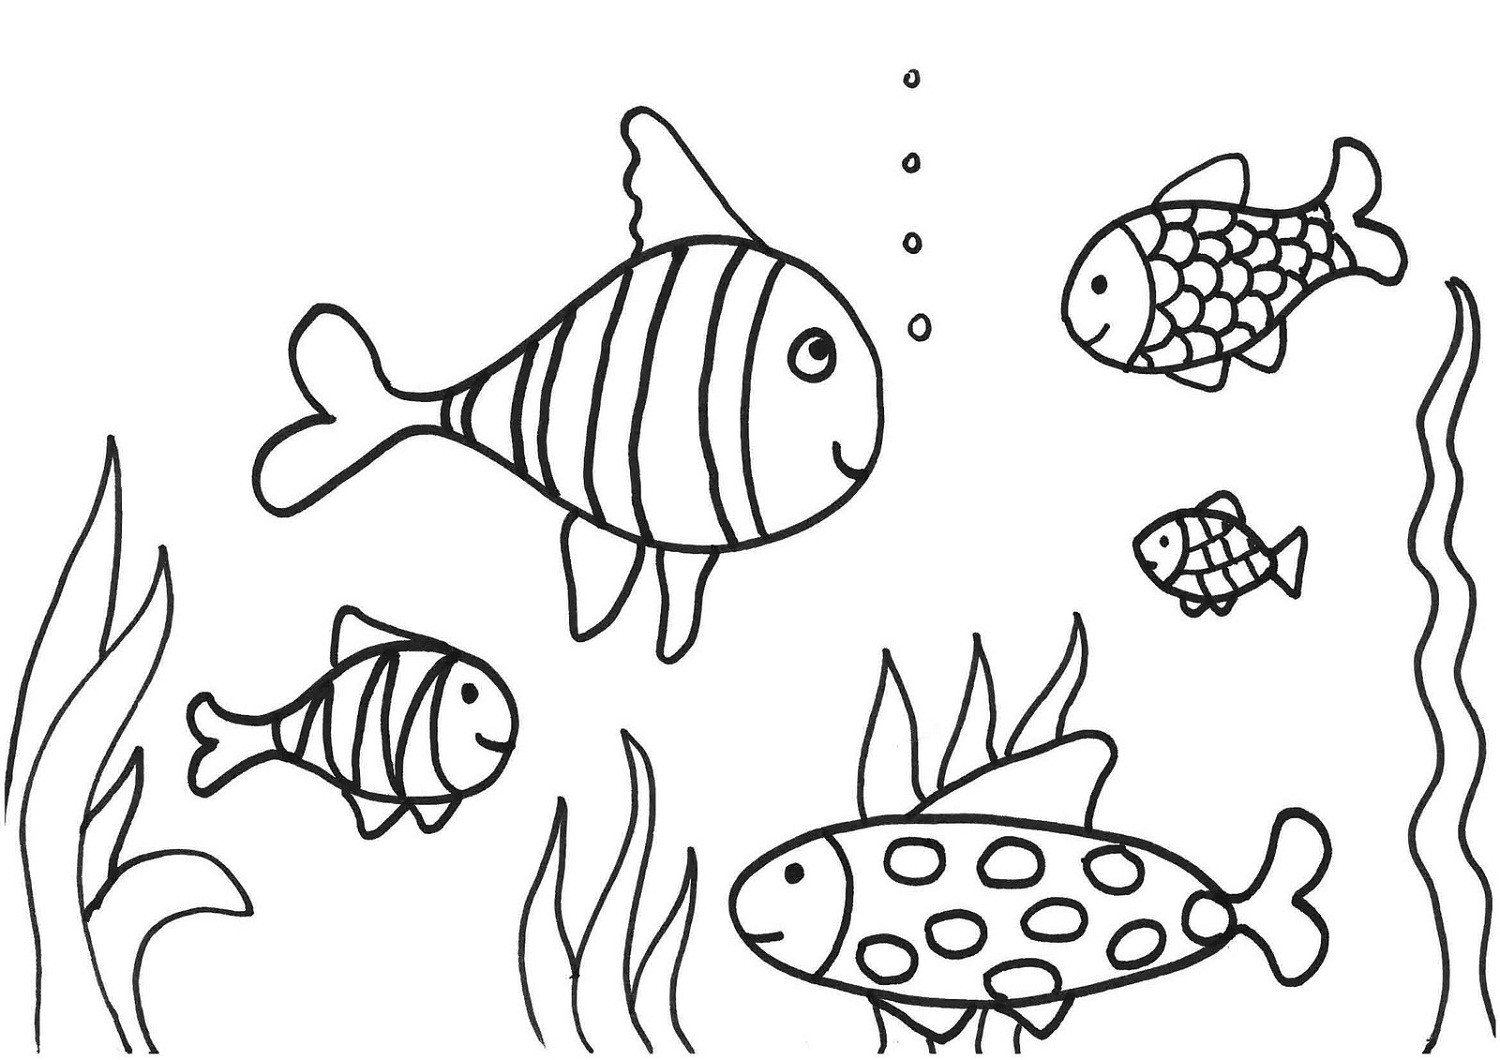 Kids Coloring Pages Fish
 Fish Coloring Page 2016 Printable